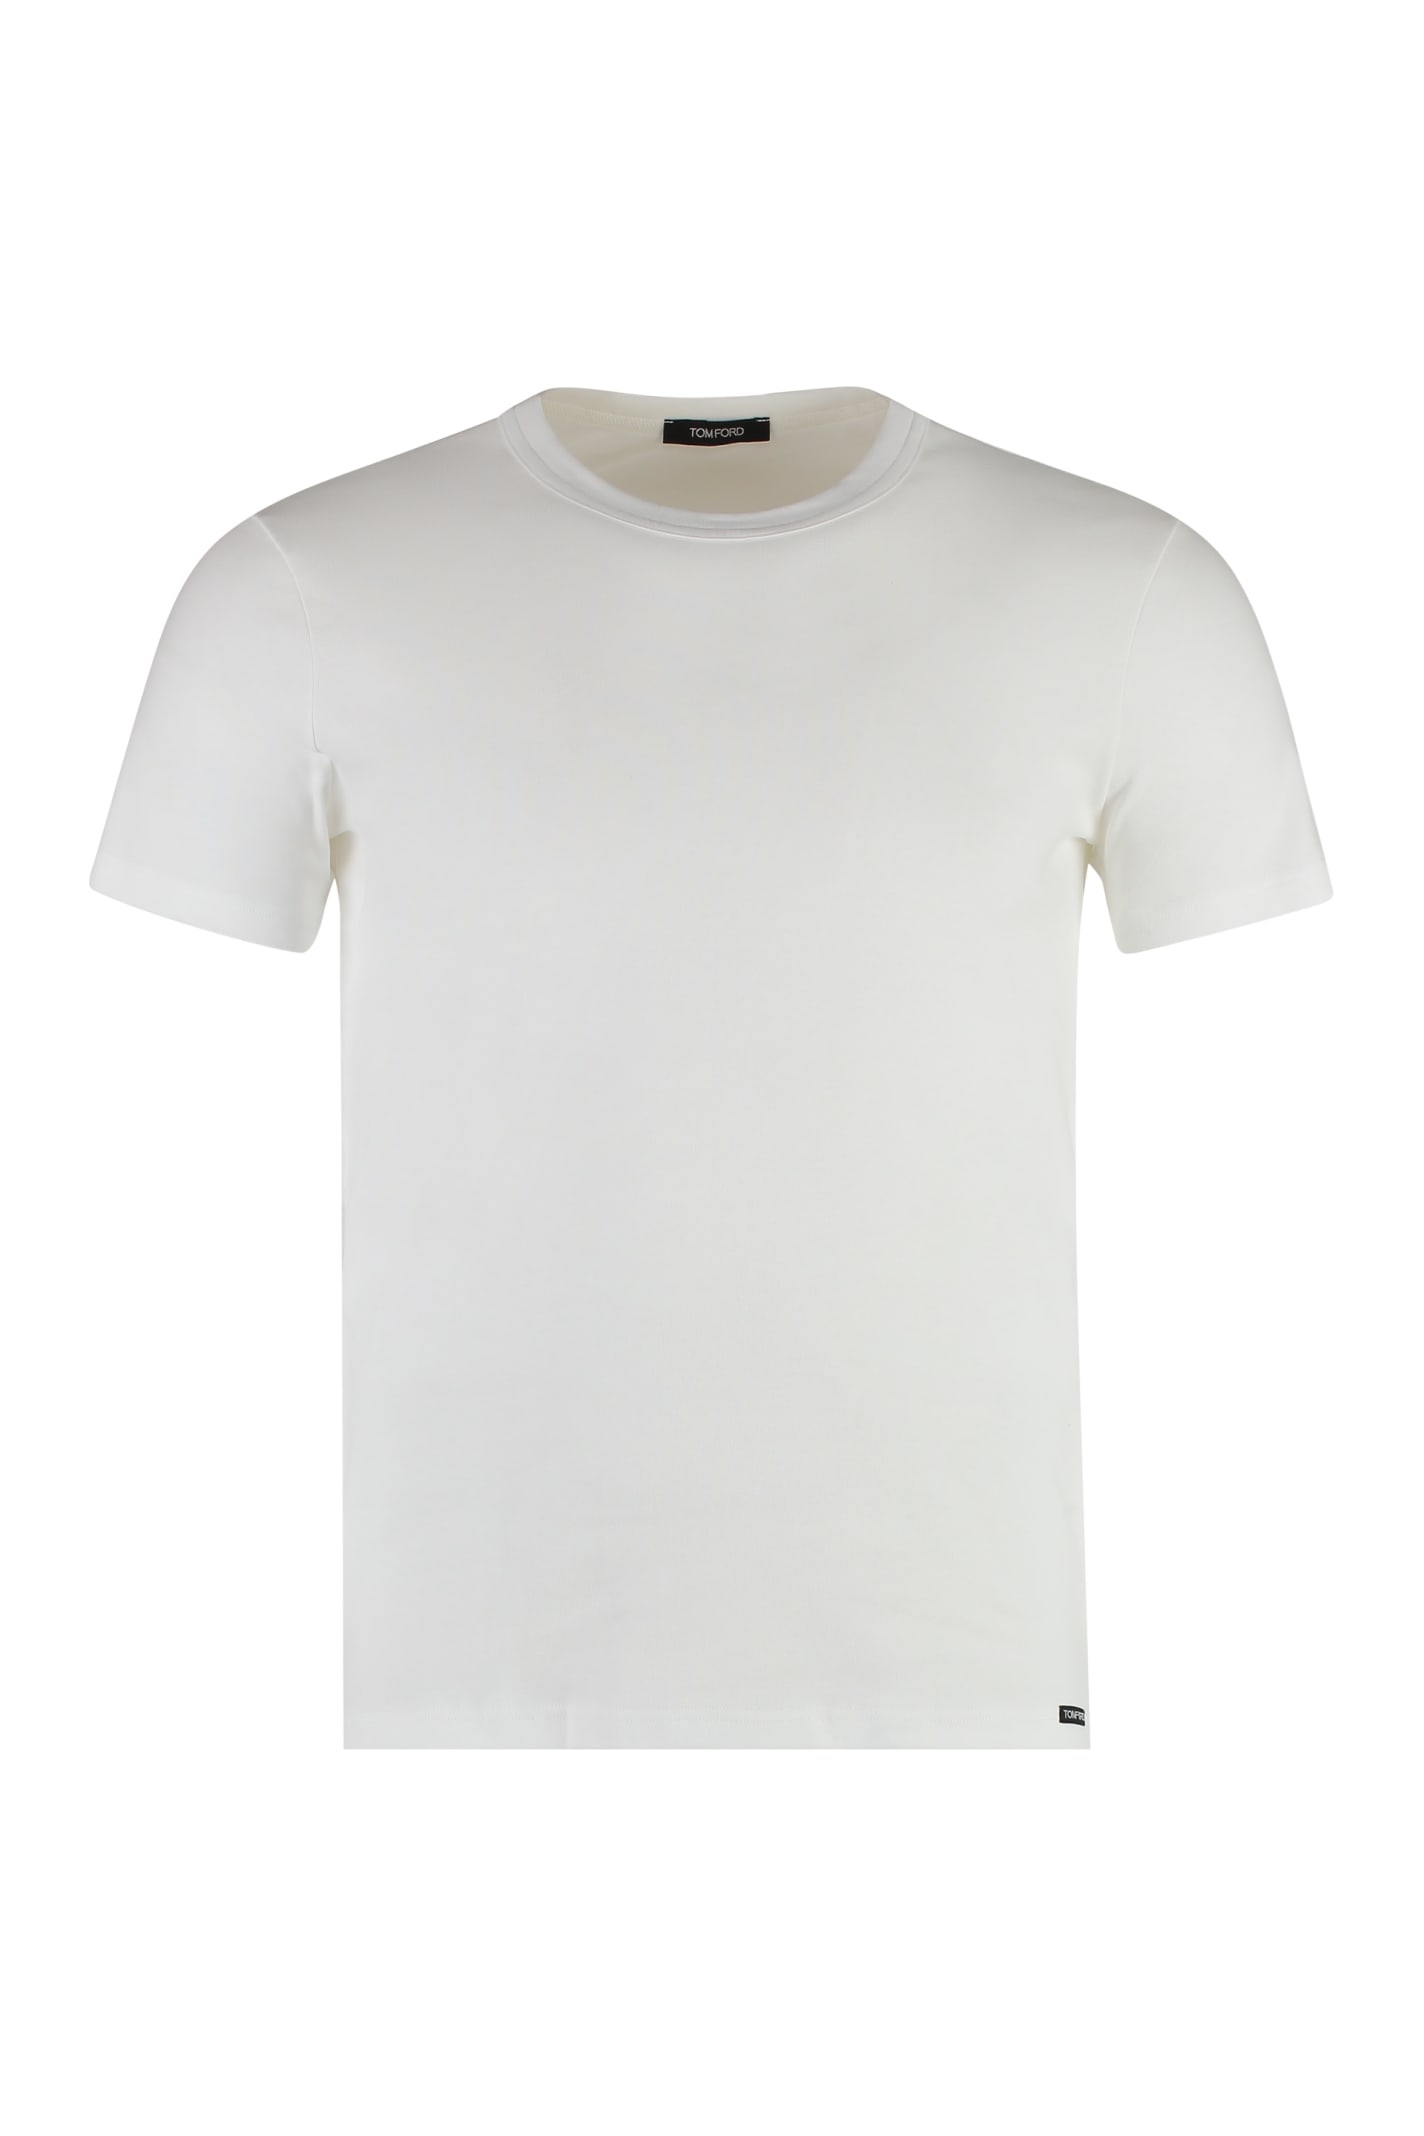 TOM FORD COTTON CREW-NECK T-SHIRT 